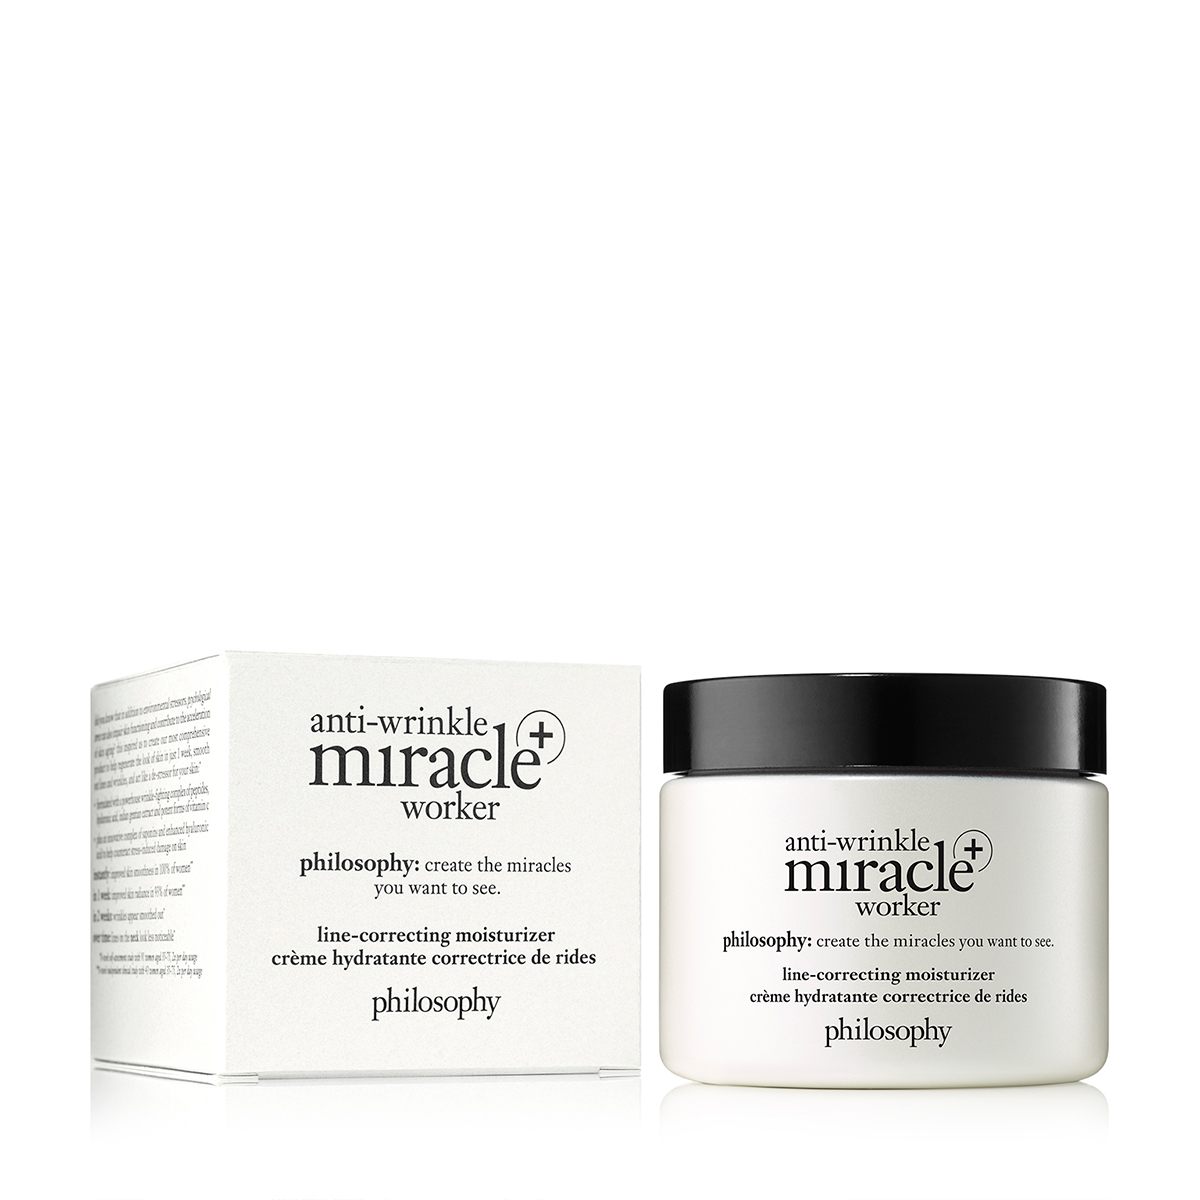 Philosophy Miracle Worker Day Anti-Wrinkle Cream